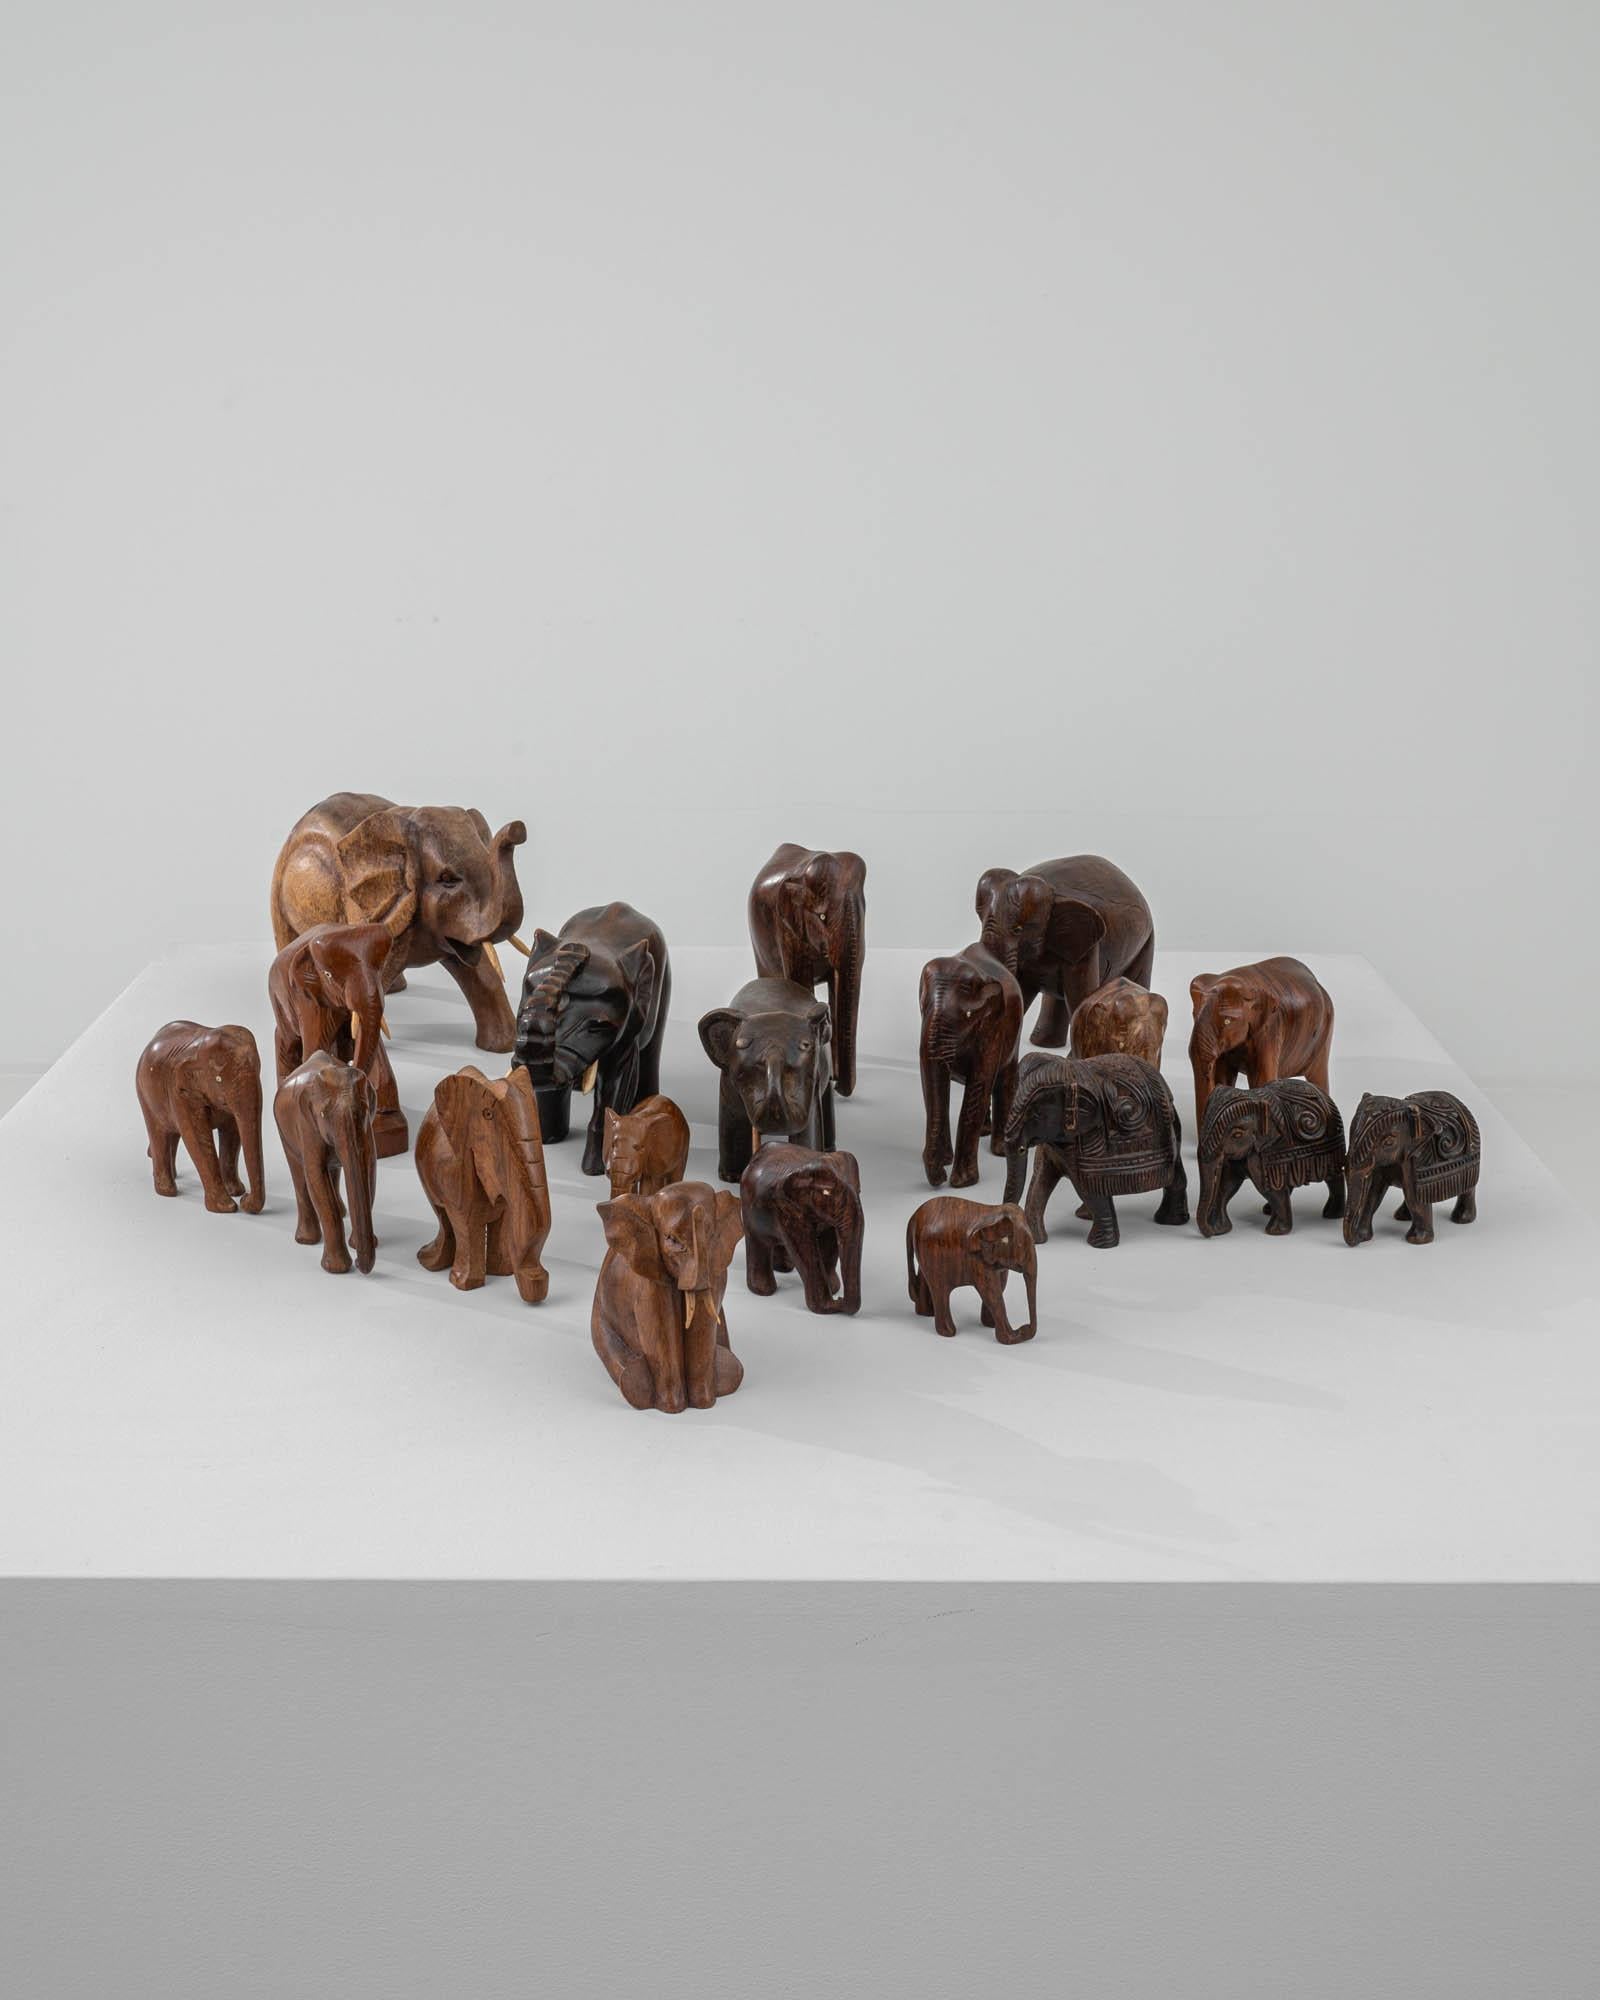 A decorative set of 19 masterfully carved wooden elephants from 20th century France. Showing both Asian and African elephant specimens, each piece is carved from realistic to abstract forms. These elephants would feel at home together in their herd